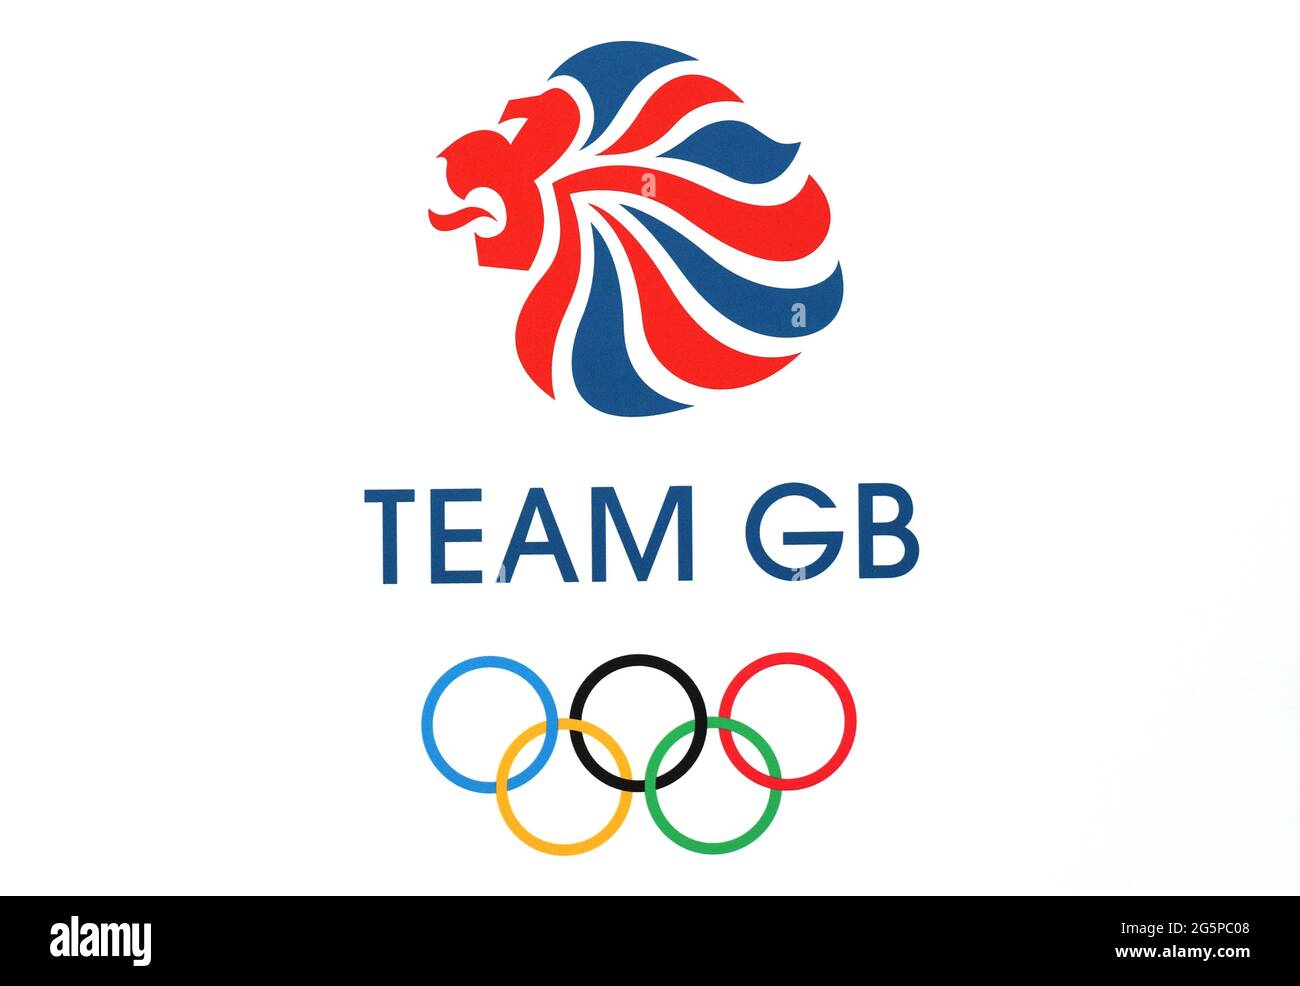 Team gb kitting out session Cut Out Stock Images & Pictures Alamy